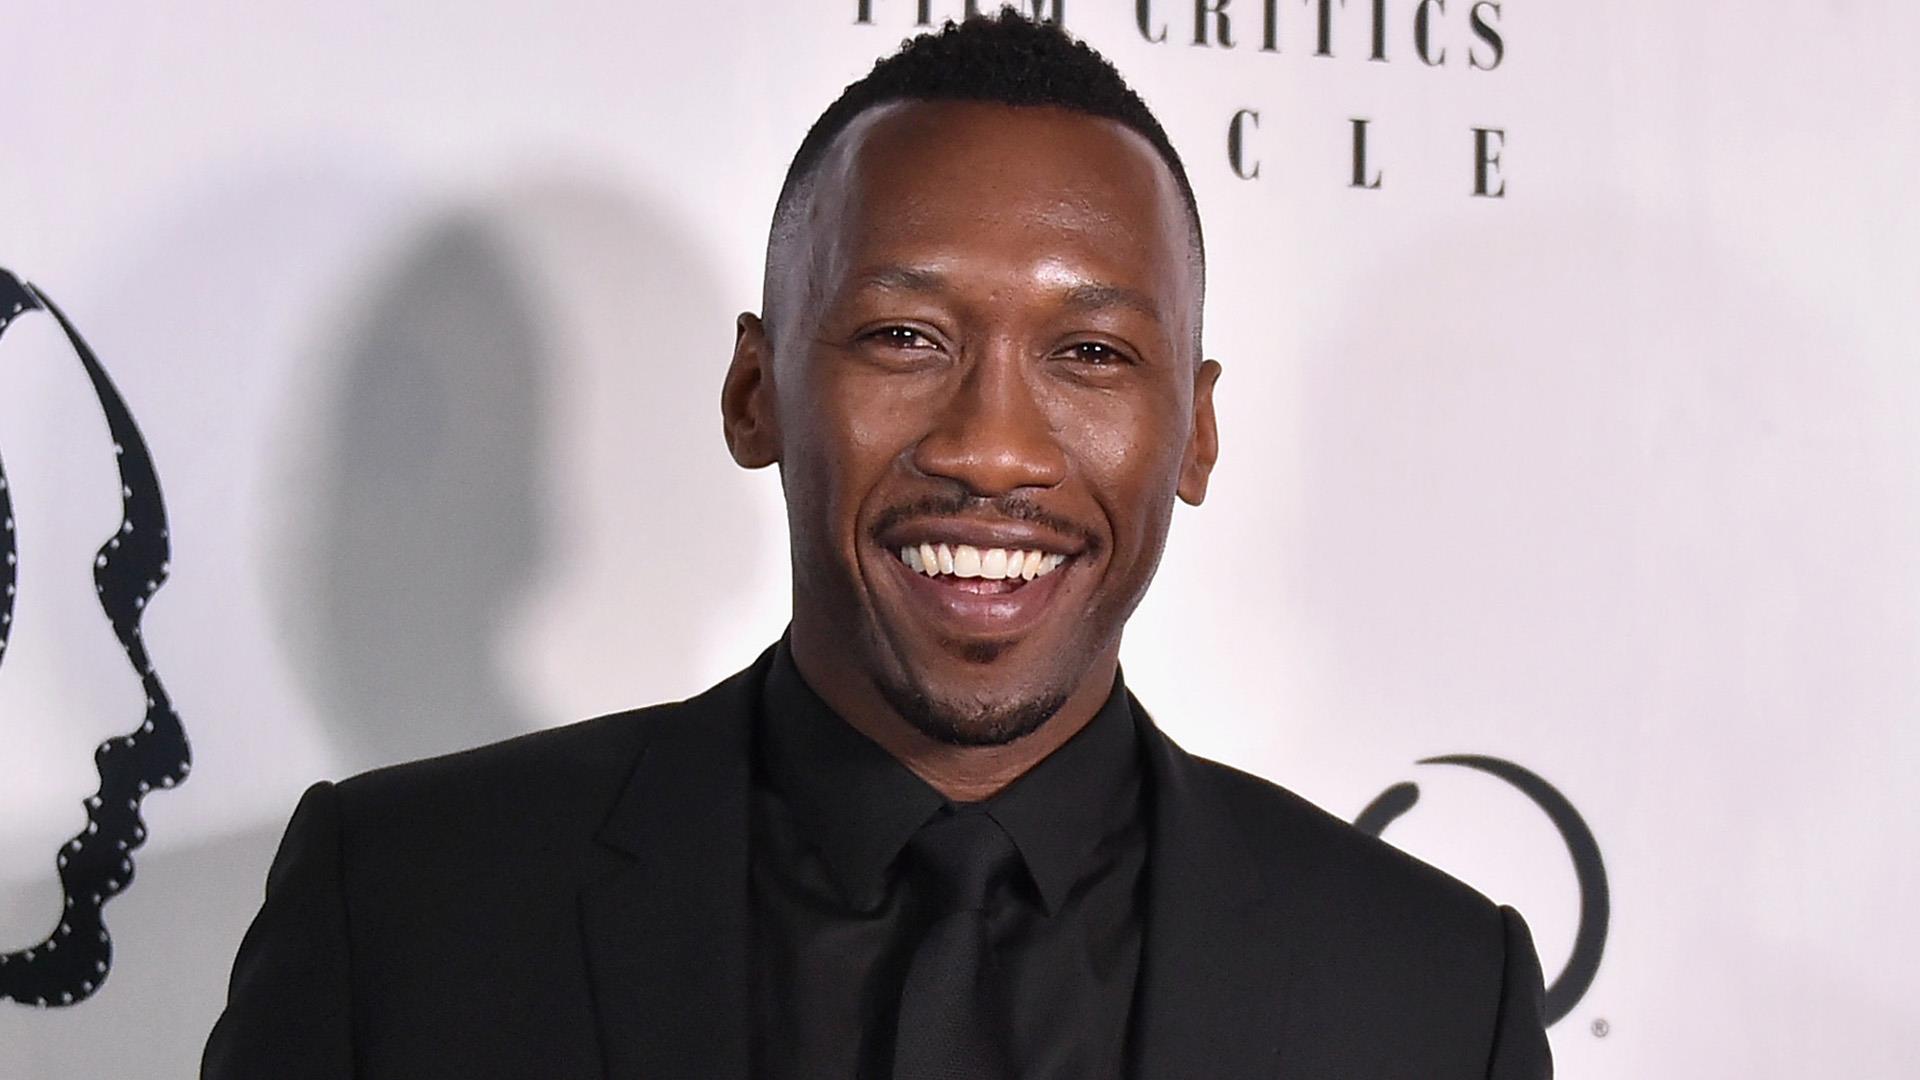 Mahershala Ali on Oscar nod for 'Moonlight': It's been a whirlwind